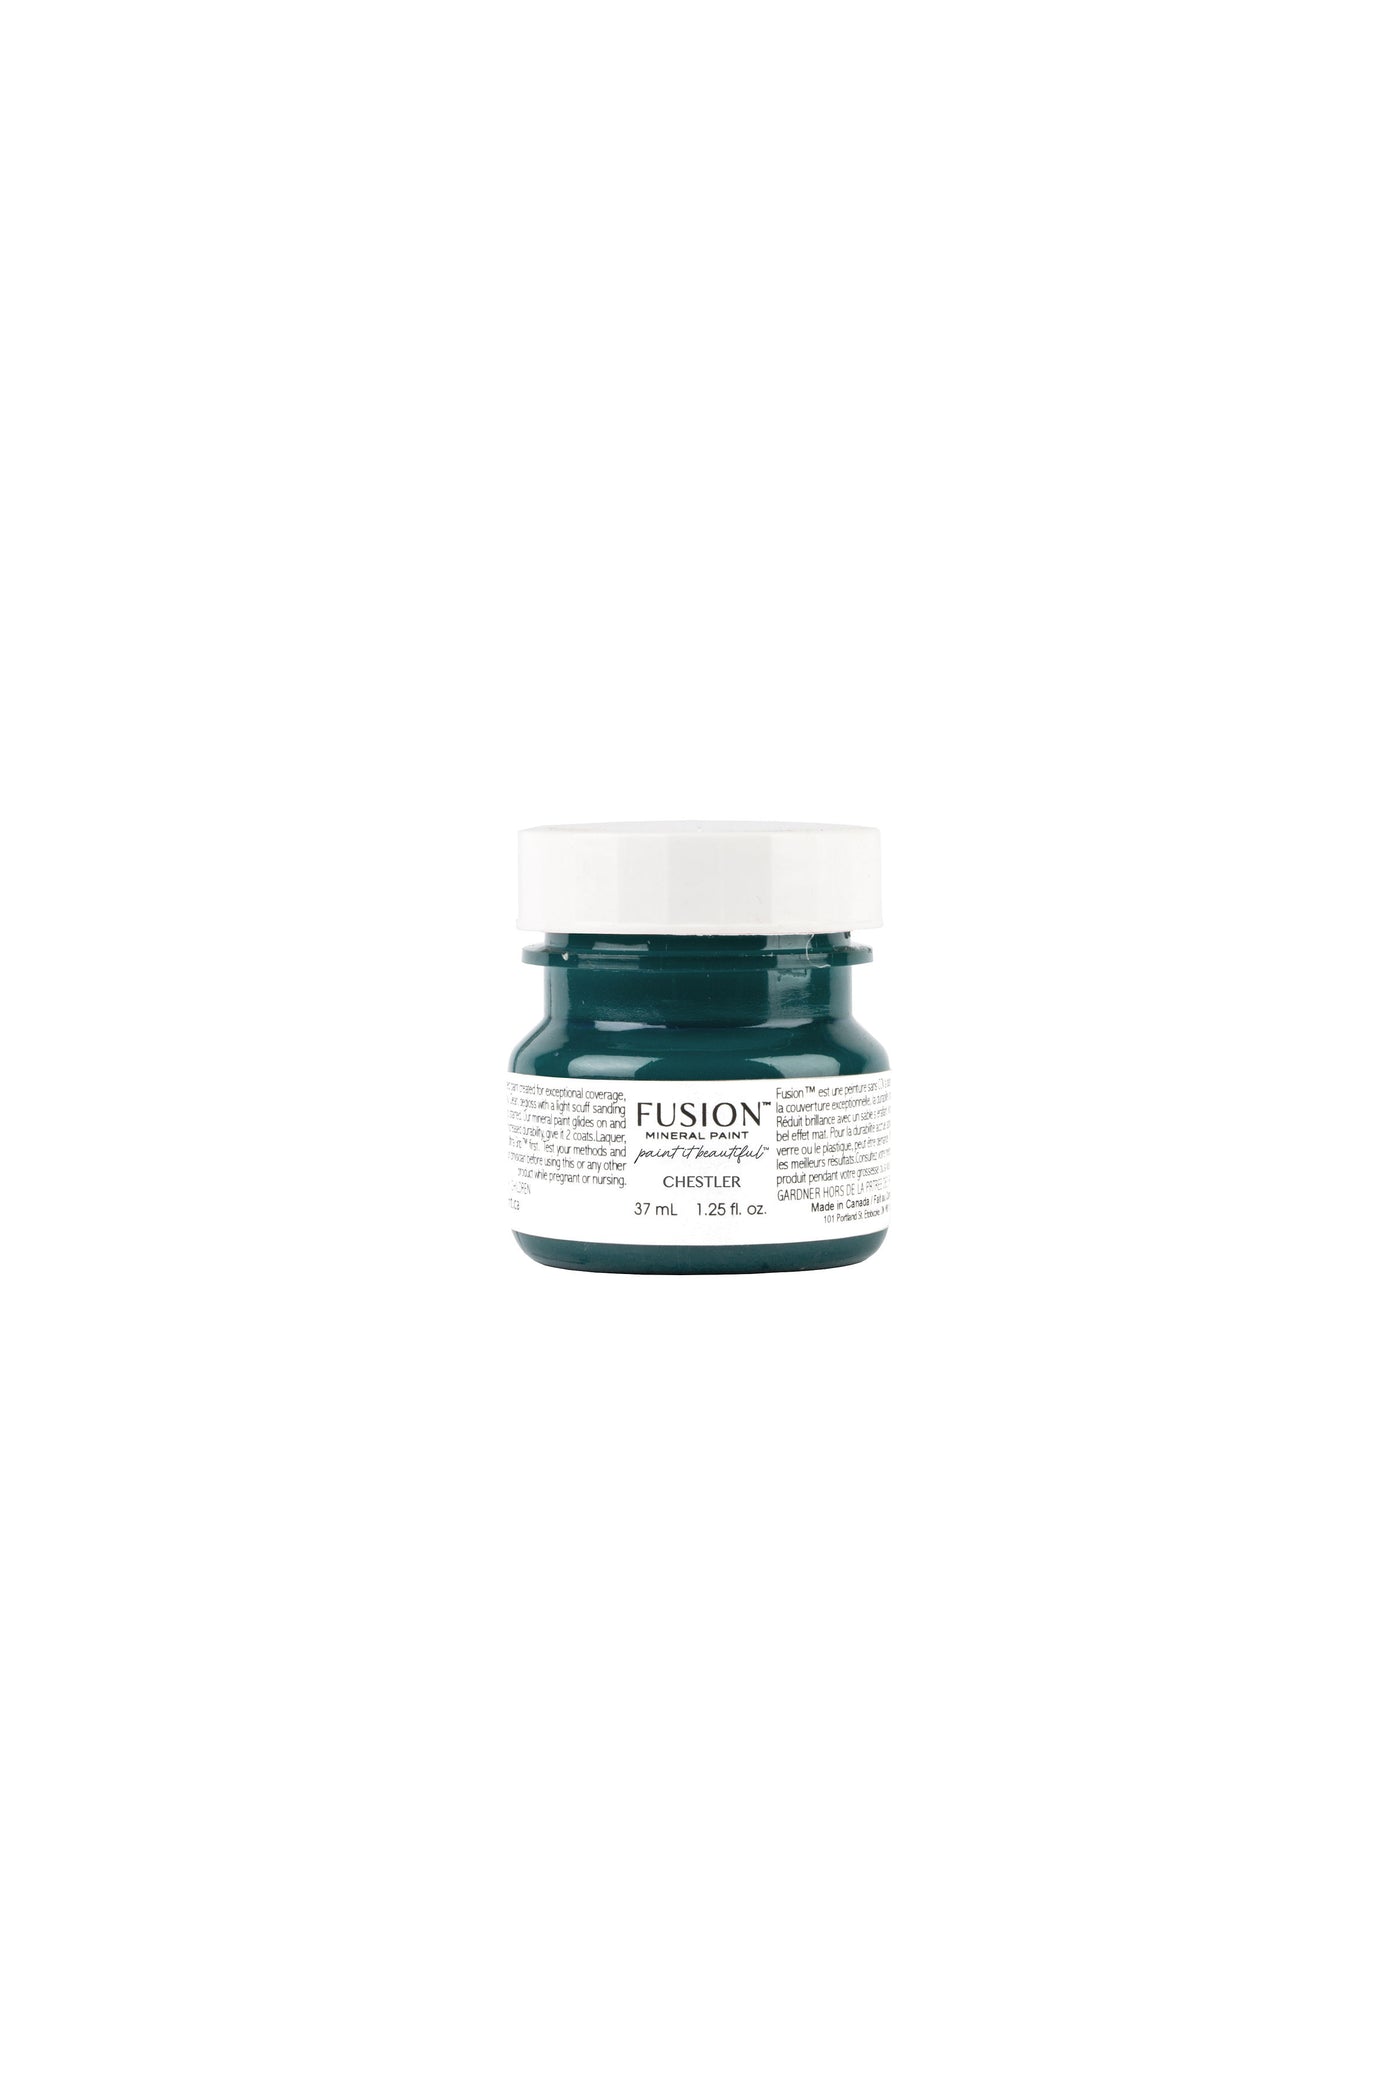 Fusion Chestler 37ml tester deep blue green mineral paint For the Love Creations Australian retailer